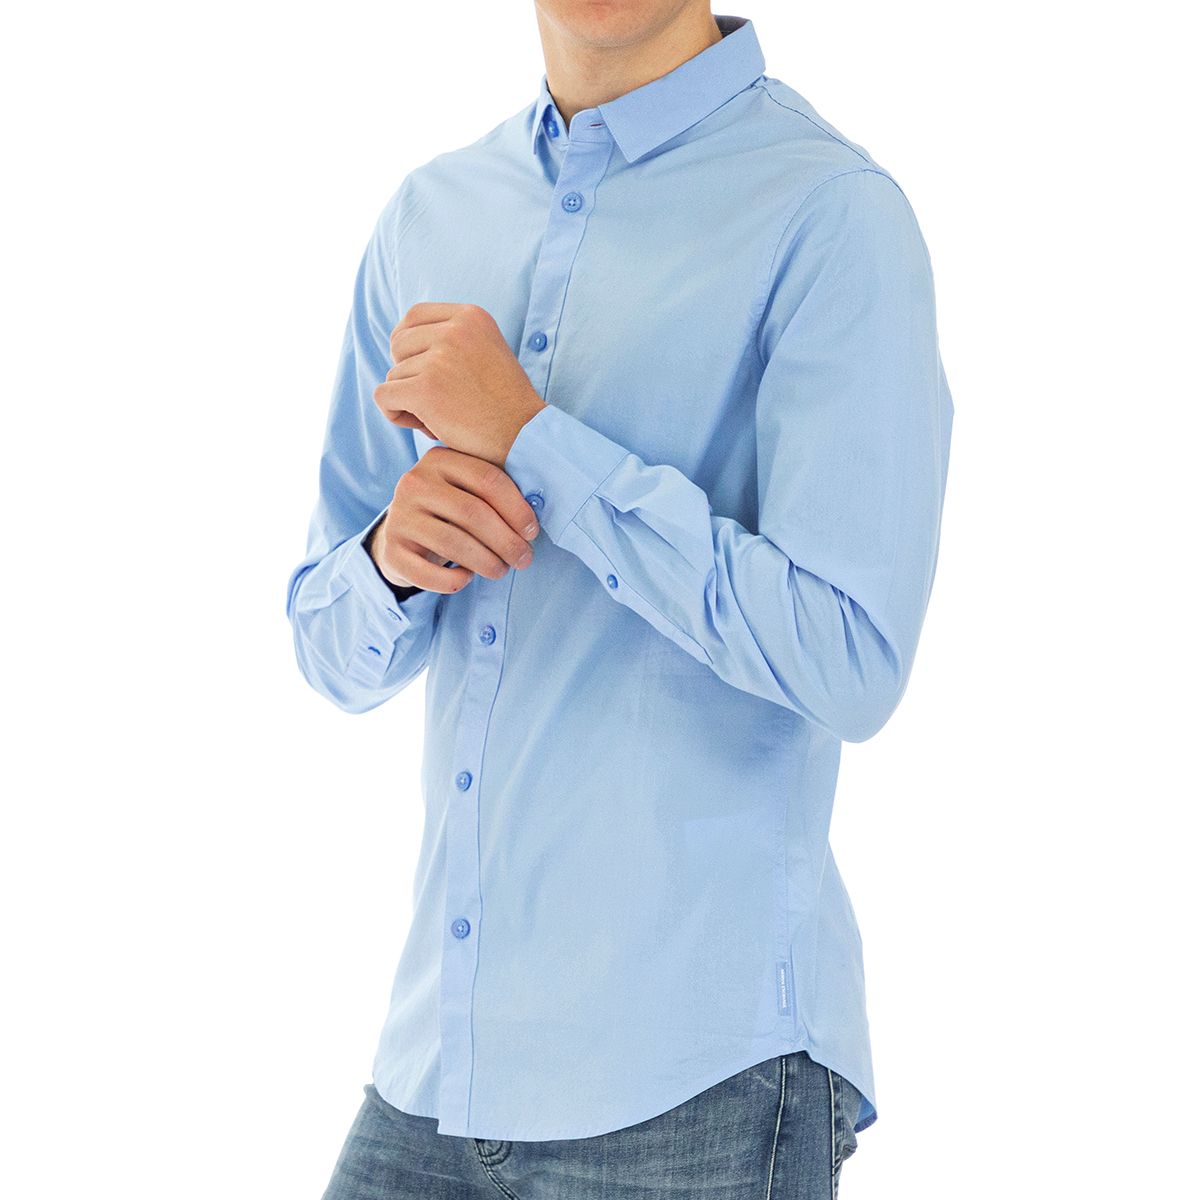 Armani Exchange 8NZC41ZN12Z-1504-S Classic and versatile, this light-blue shirt is an staple clothing piece that every man should keep in their wardrobe.